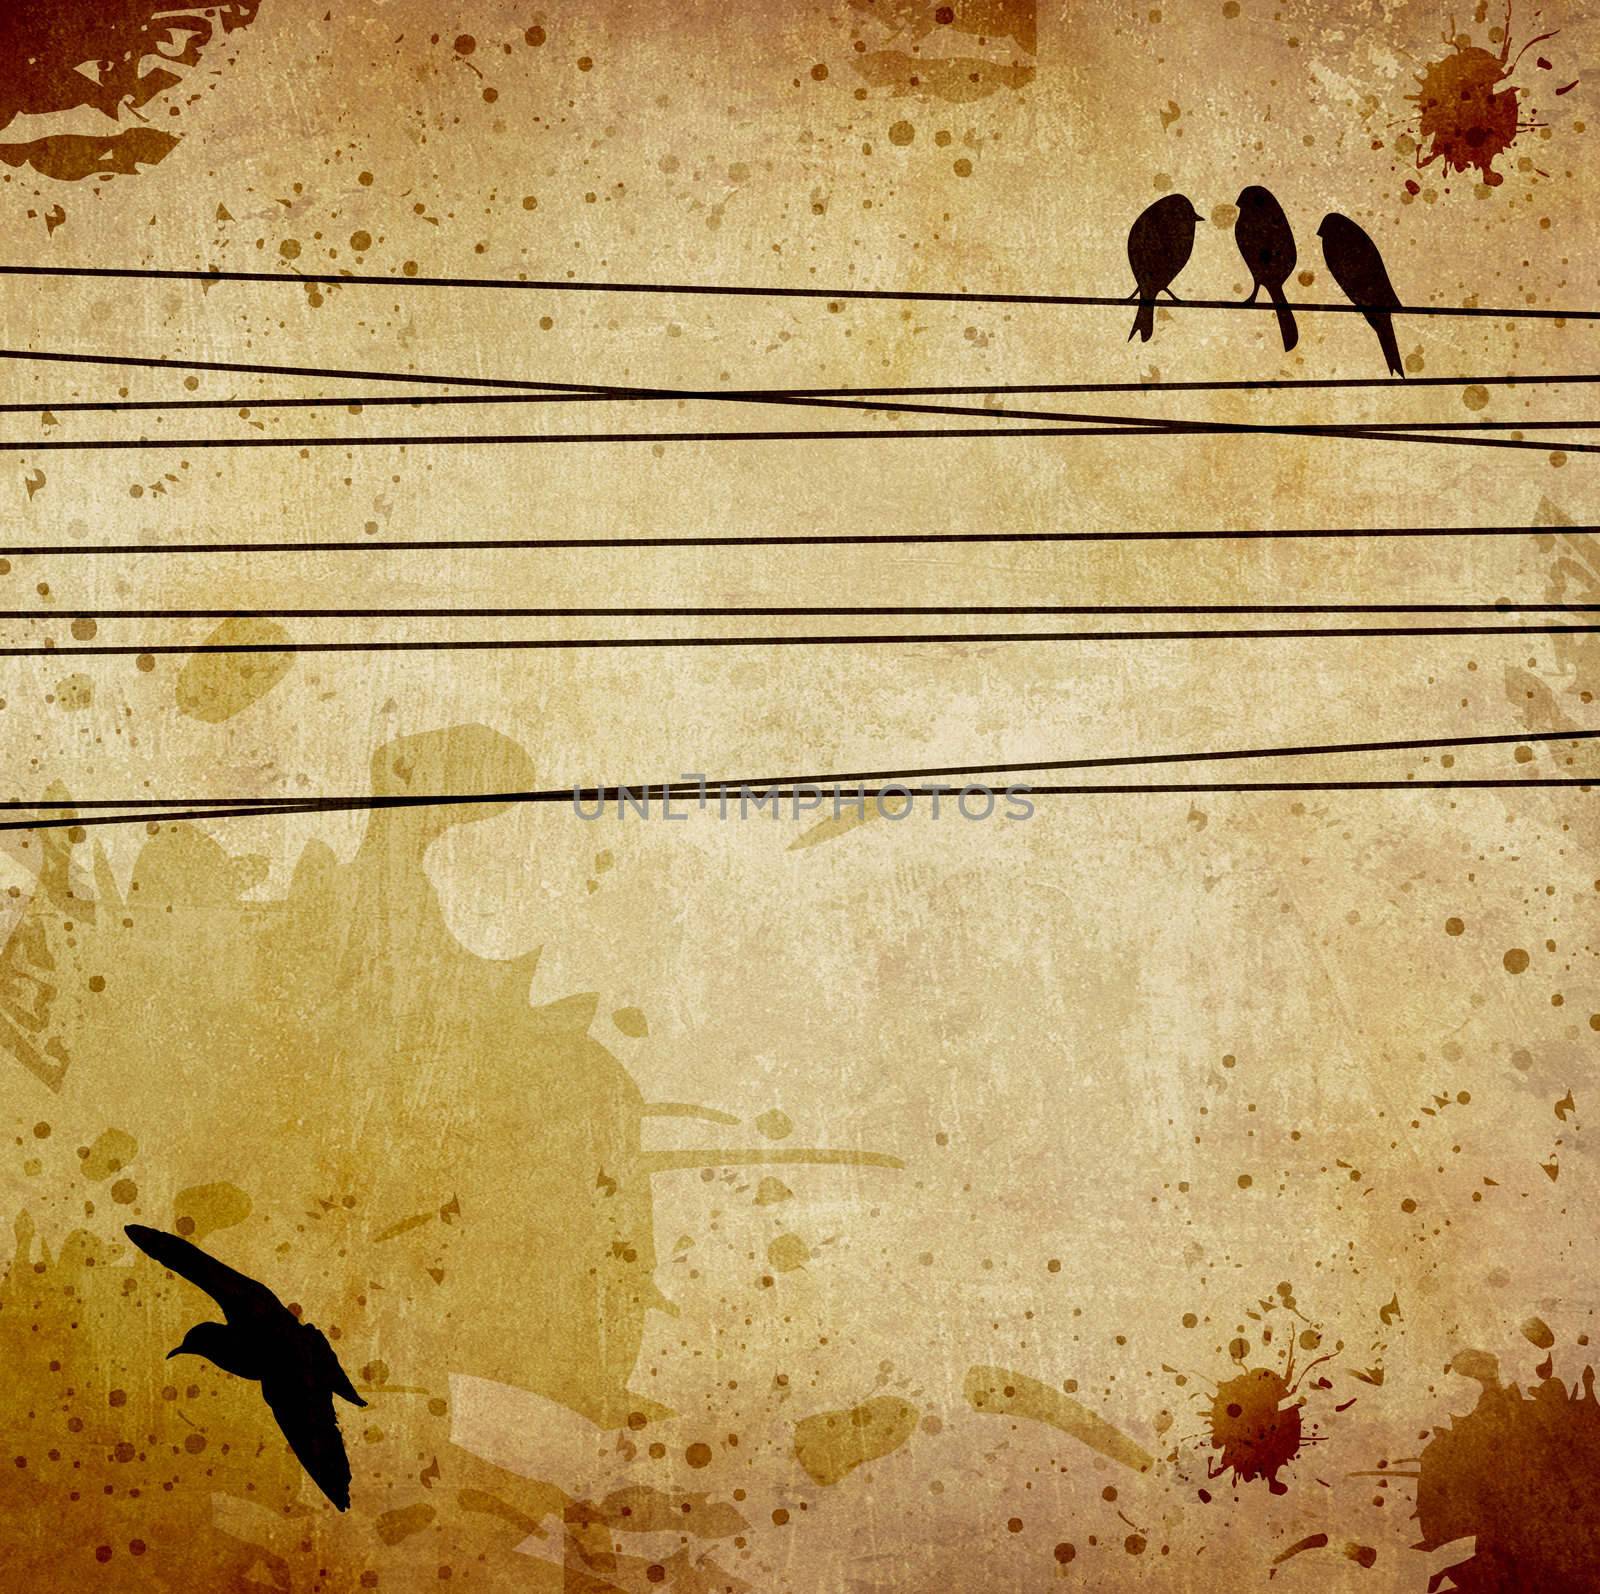 High contrast cables and birds in vintage background. 